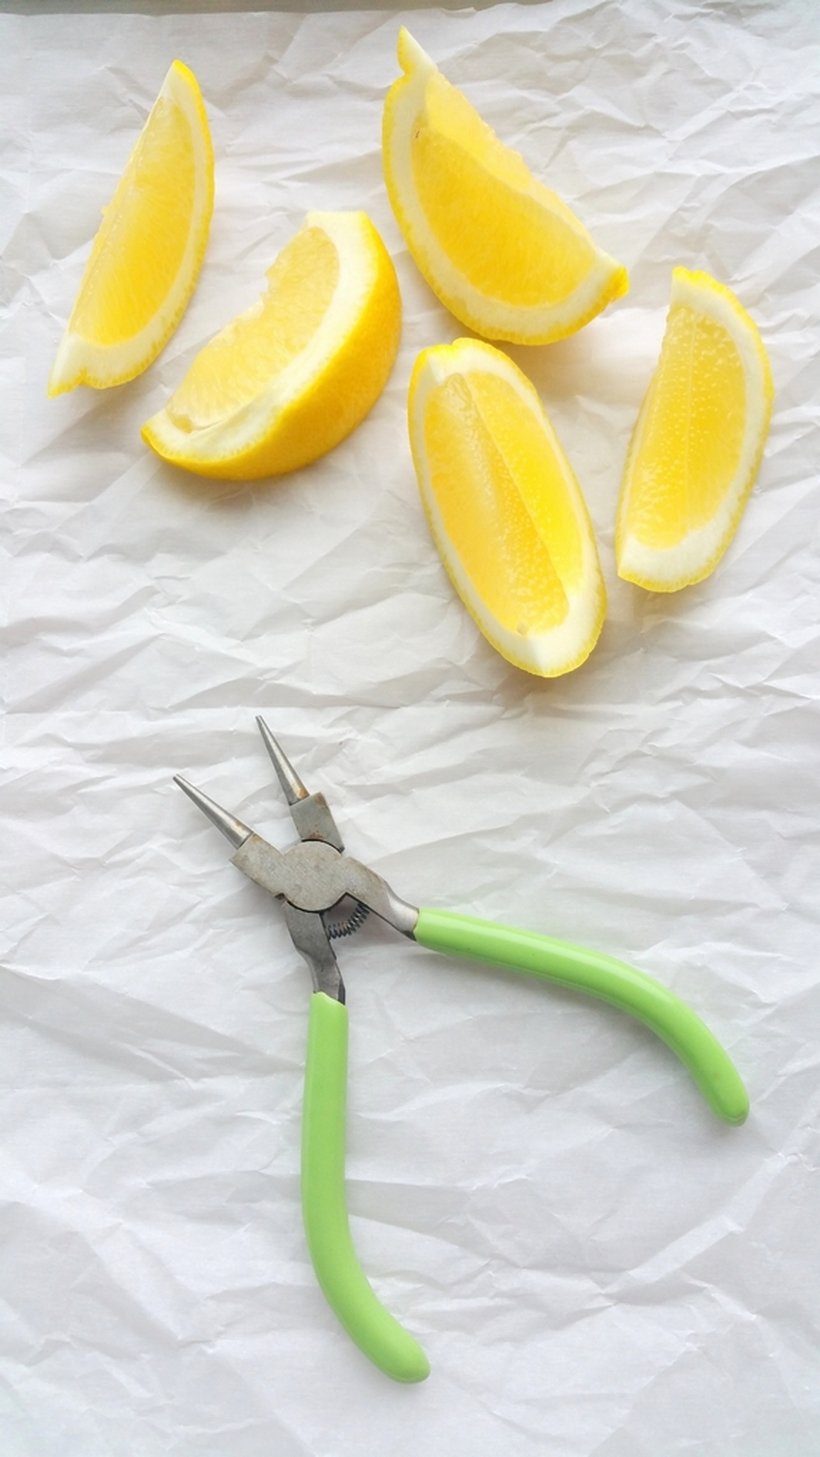 Slice the lemon with needle-nose pliers.